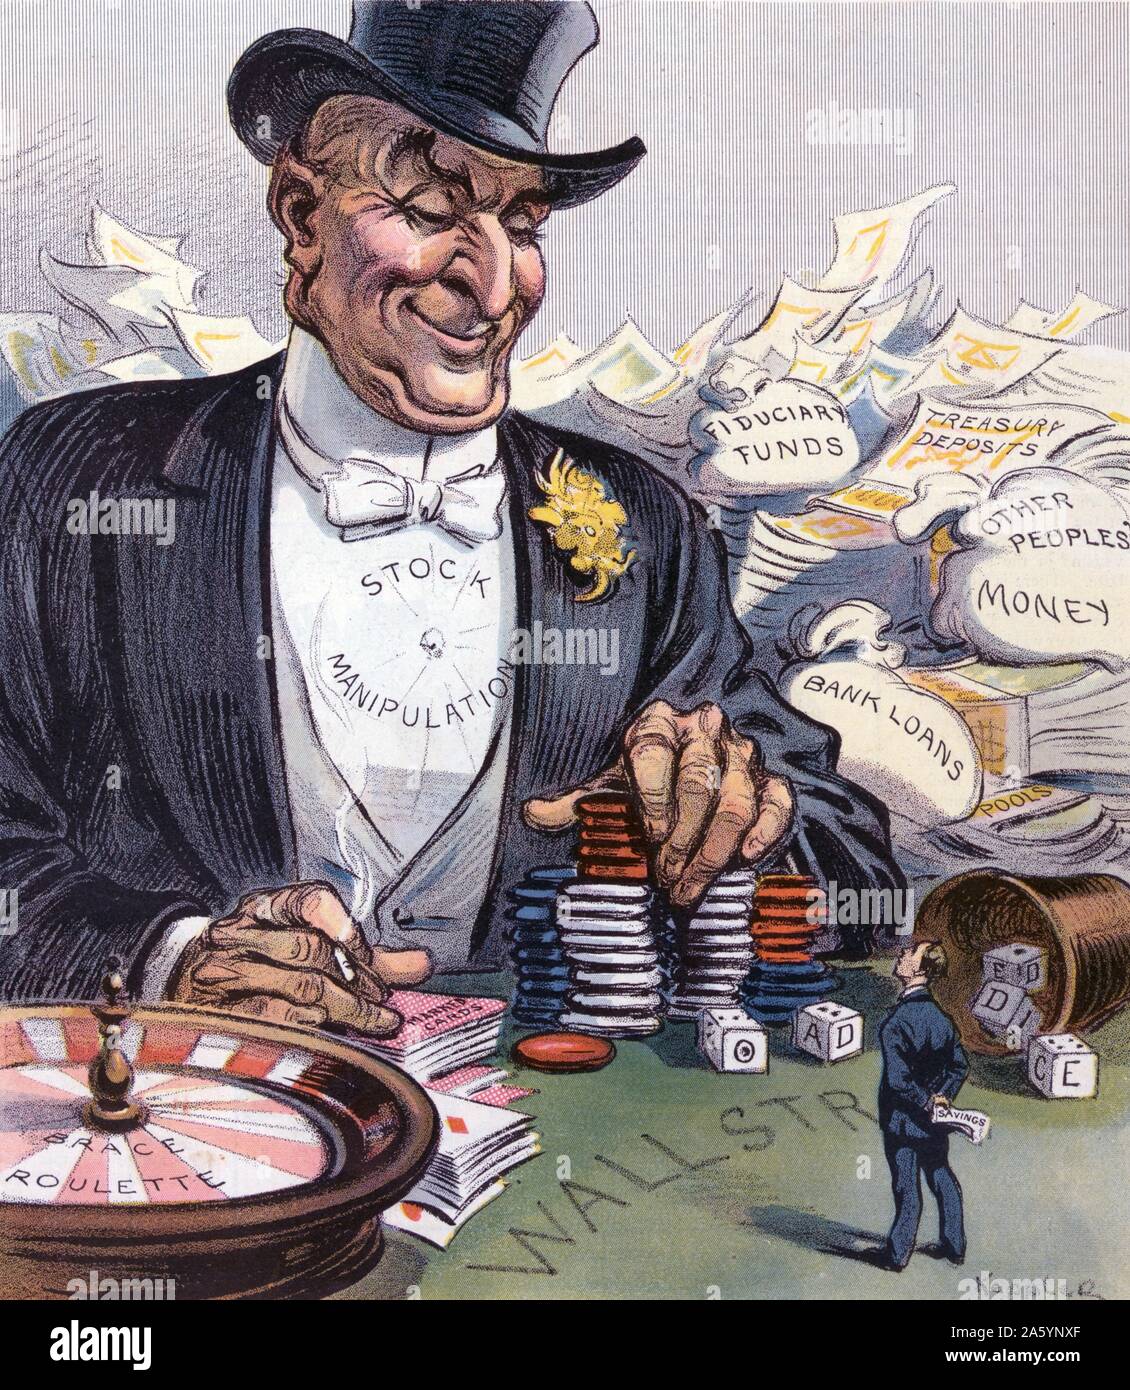 What show have you got, little man? by Udo Keppler, 1872-1956, artist. published 1908. Illustration shows a man wearing top hat and tuxedo labelled 'Stock Manipulation', one hand resting on a deck of 'Marked Cards' and the other on a stack of gambling chips next to 'Loaded Dice' and a wheel labelled 'Brace Roulette', all on a playing table labelled 'Wall Street[street]', behind him are money bags and papers labelled 'Fiduciary Funds, Treasury Deposits, Other Peoples' Money, Bank Loans, [and] Pools'; standing in the foreground is a diminutive man holding his 'Savings' behind his back. Stock Photo